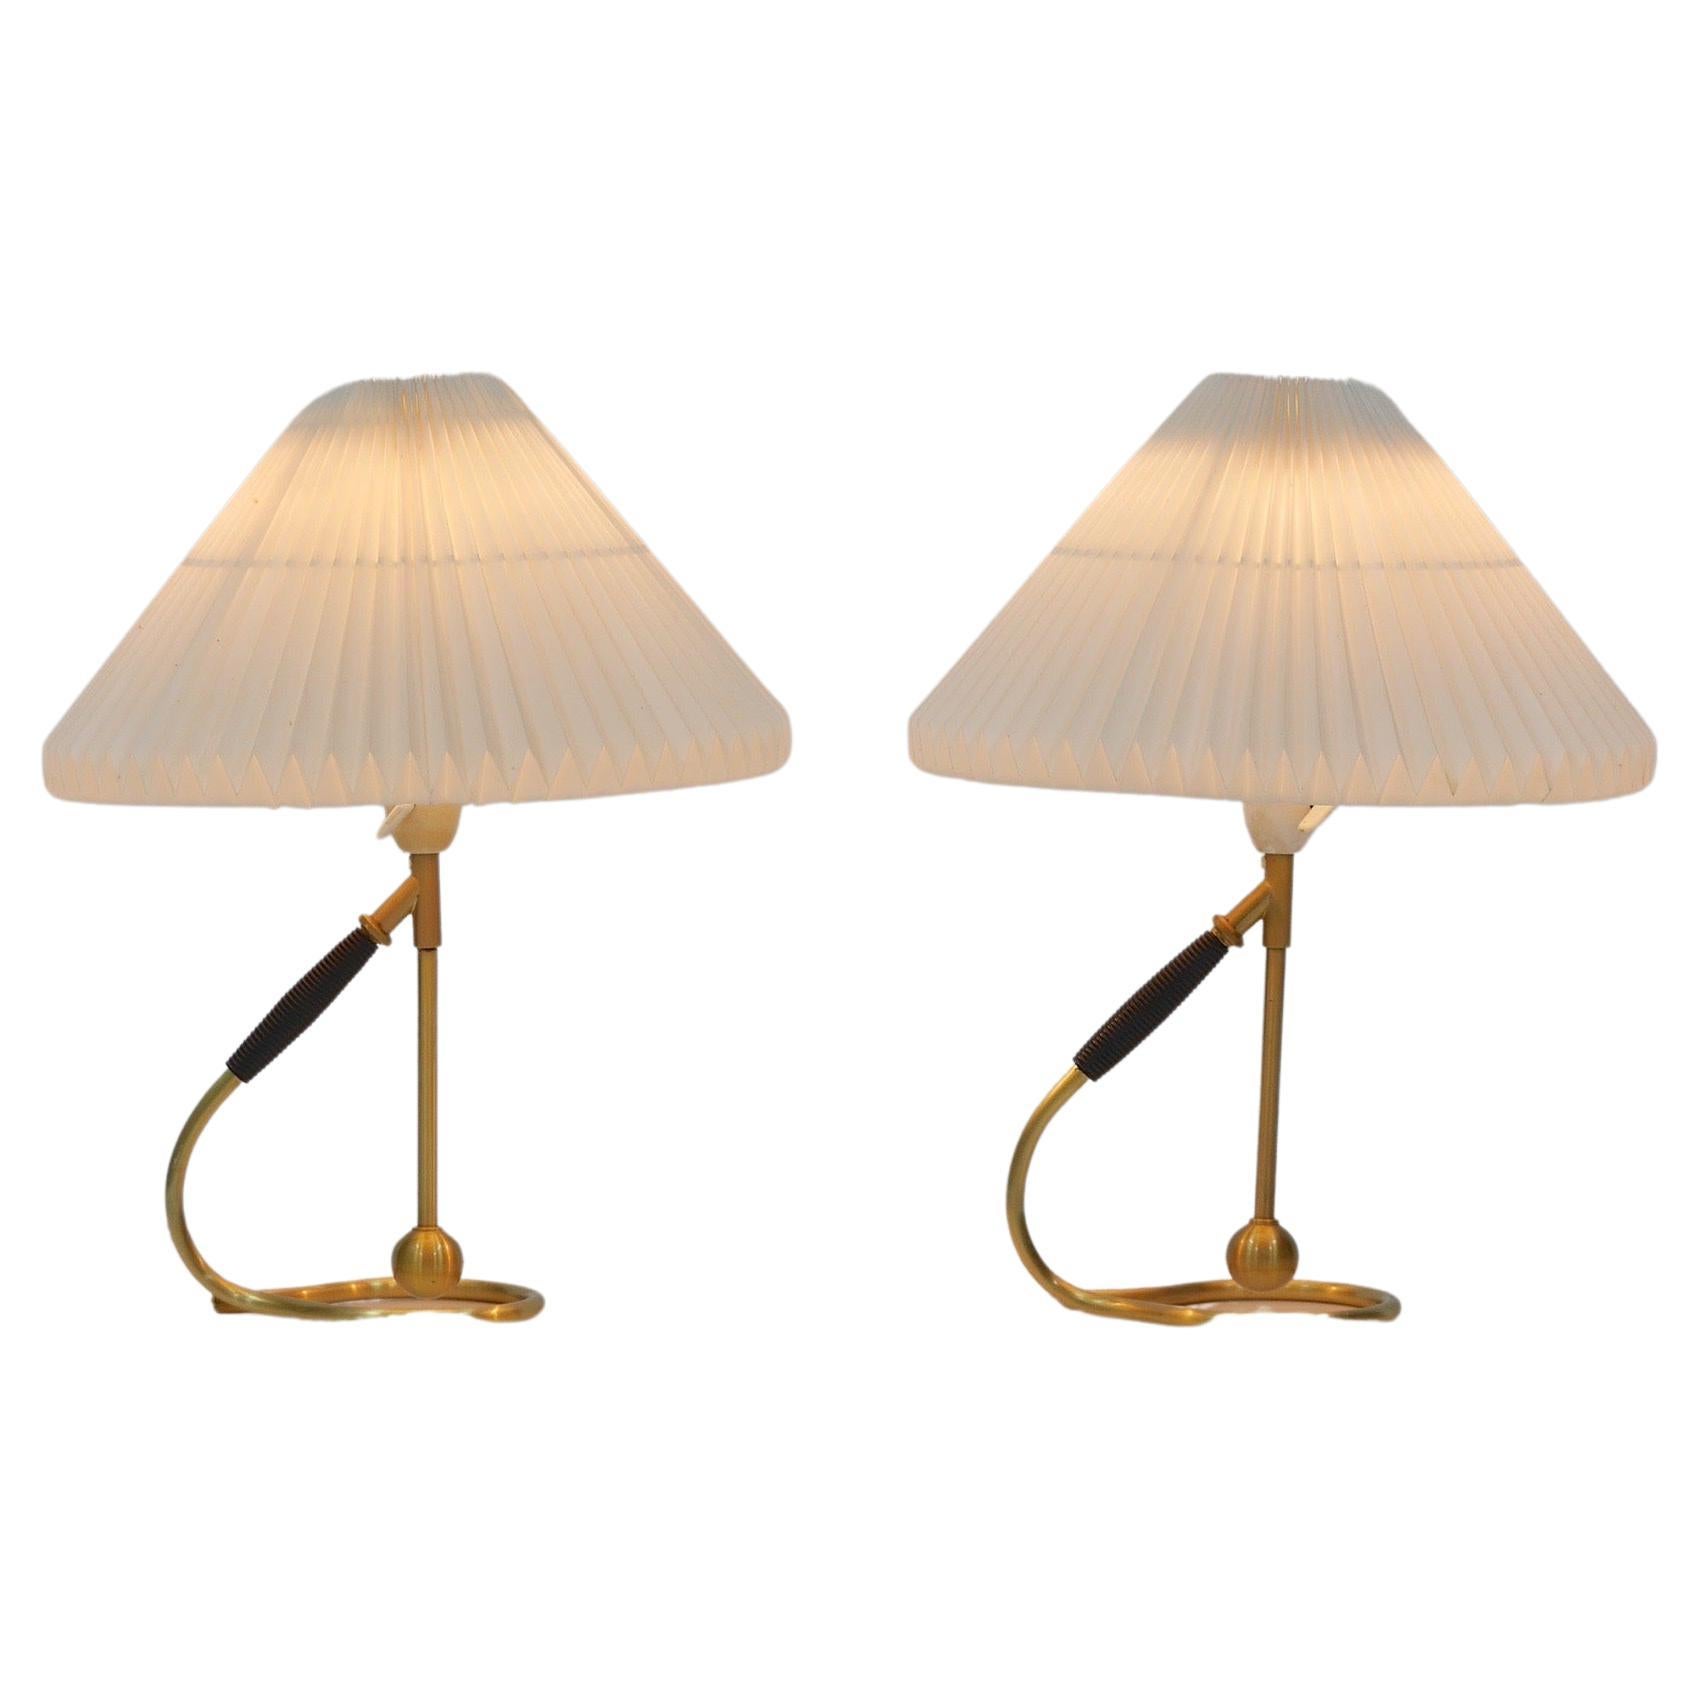 Pair of Le Klint 306 Adjustable Brass Table / Wall Lamps, Design Denmark, 1945 For Sale